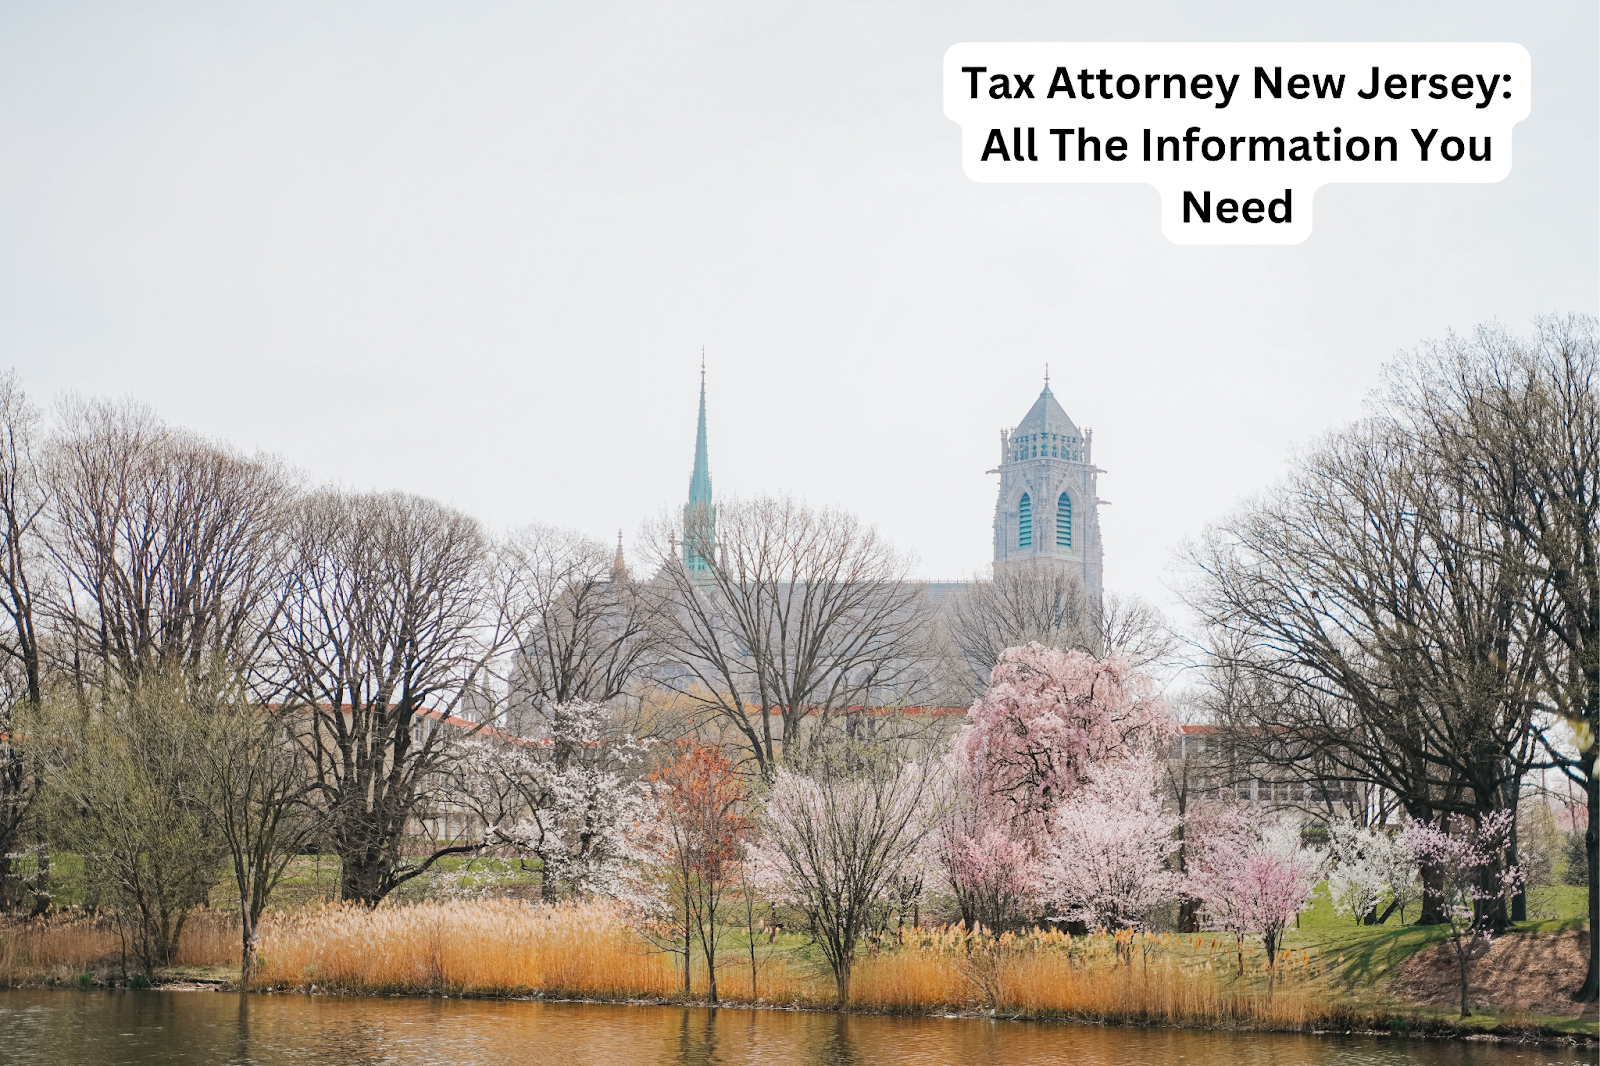 Tax Attorney New Jersey: All The Information You Need